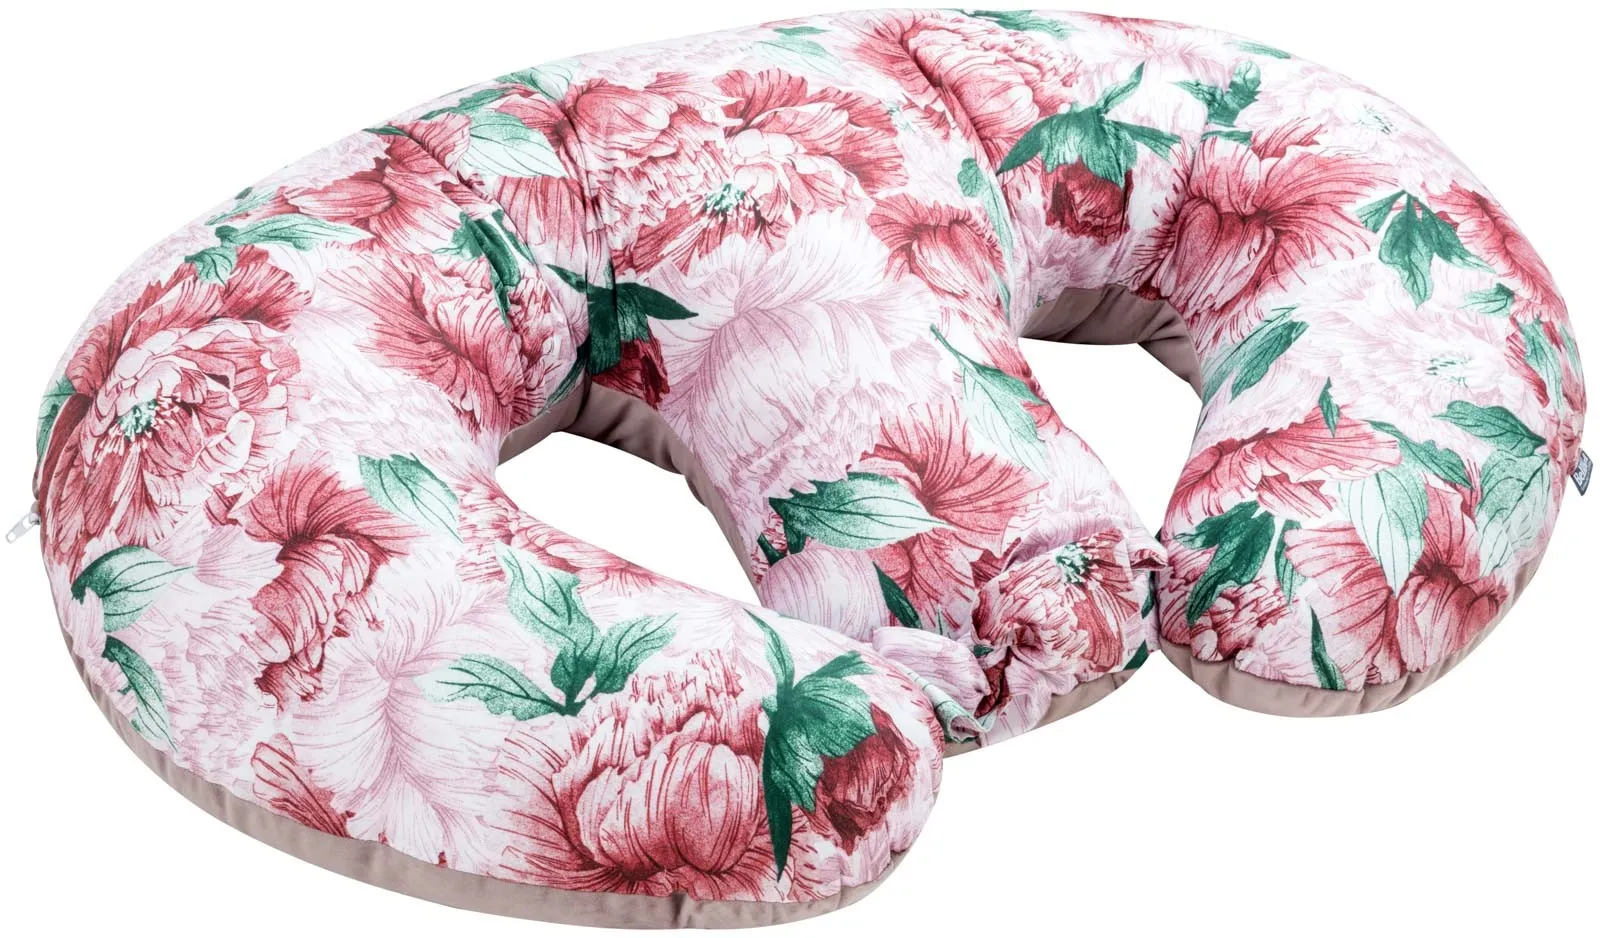 Large double twin pillow 100×57 cm pink peony